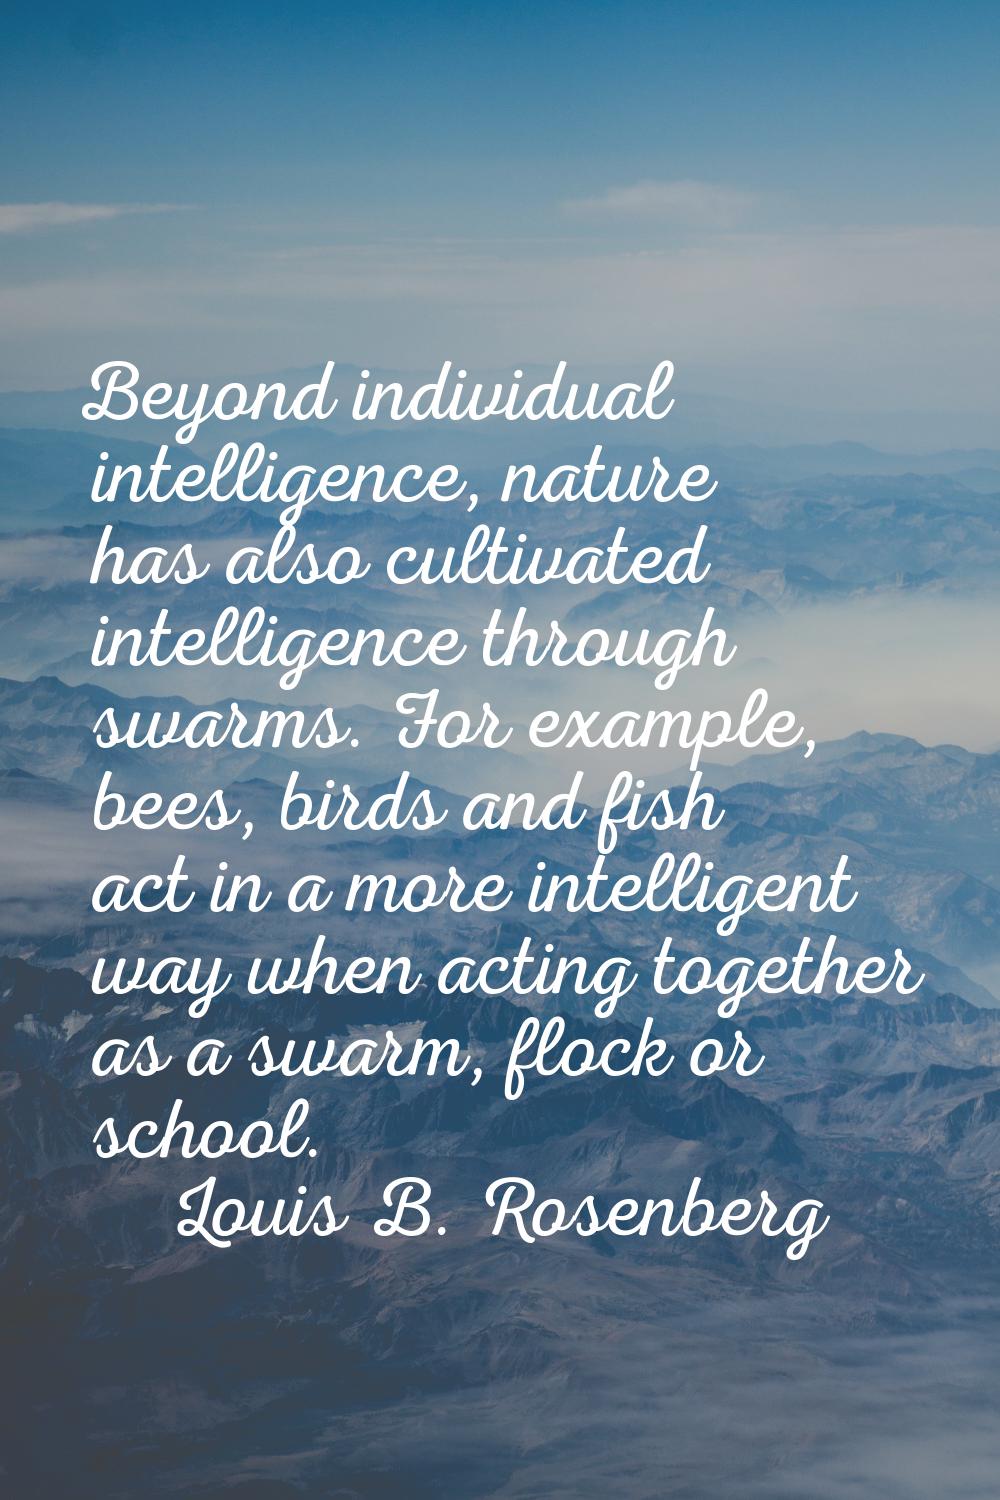 Beyond individual intelligence, nature has also cultivated intelligence through swarms. For example